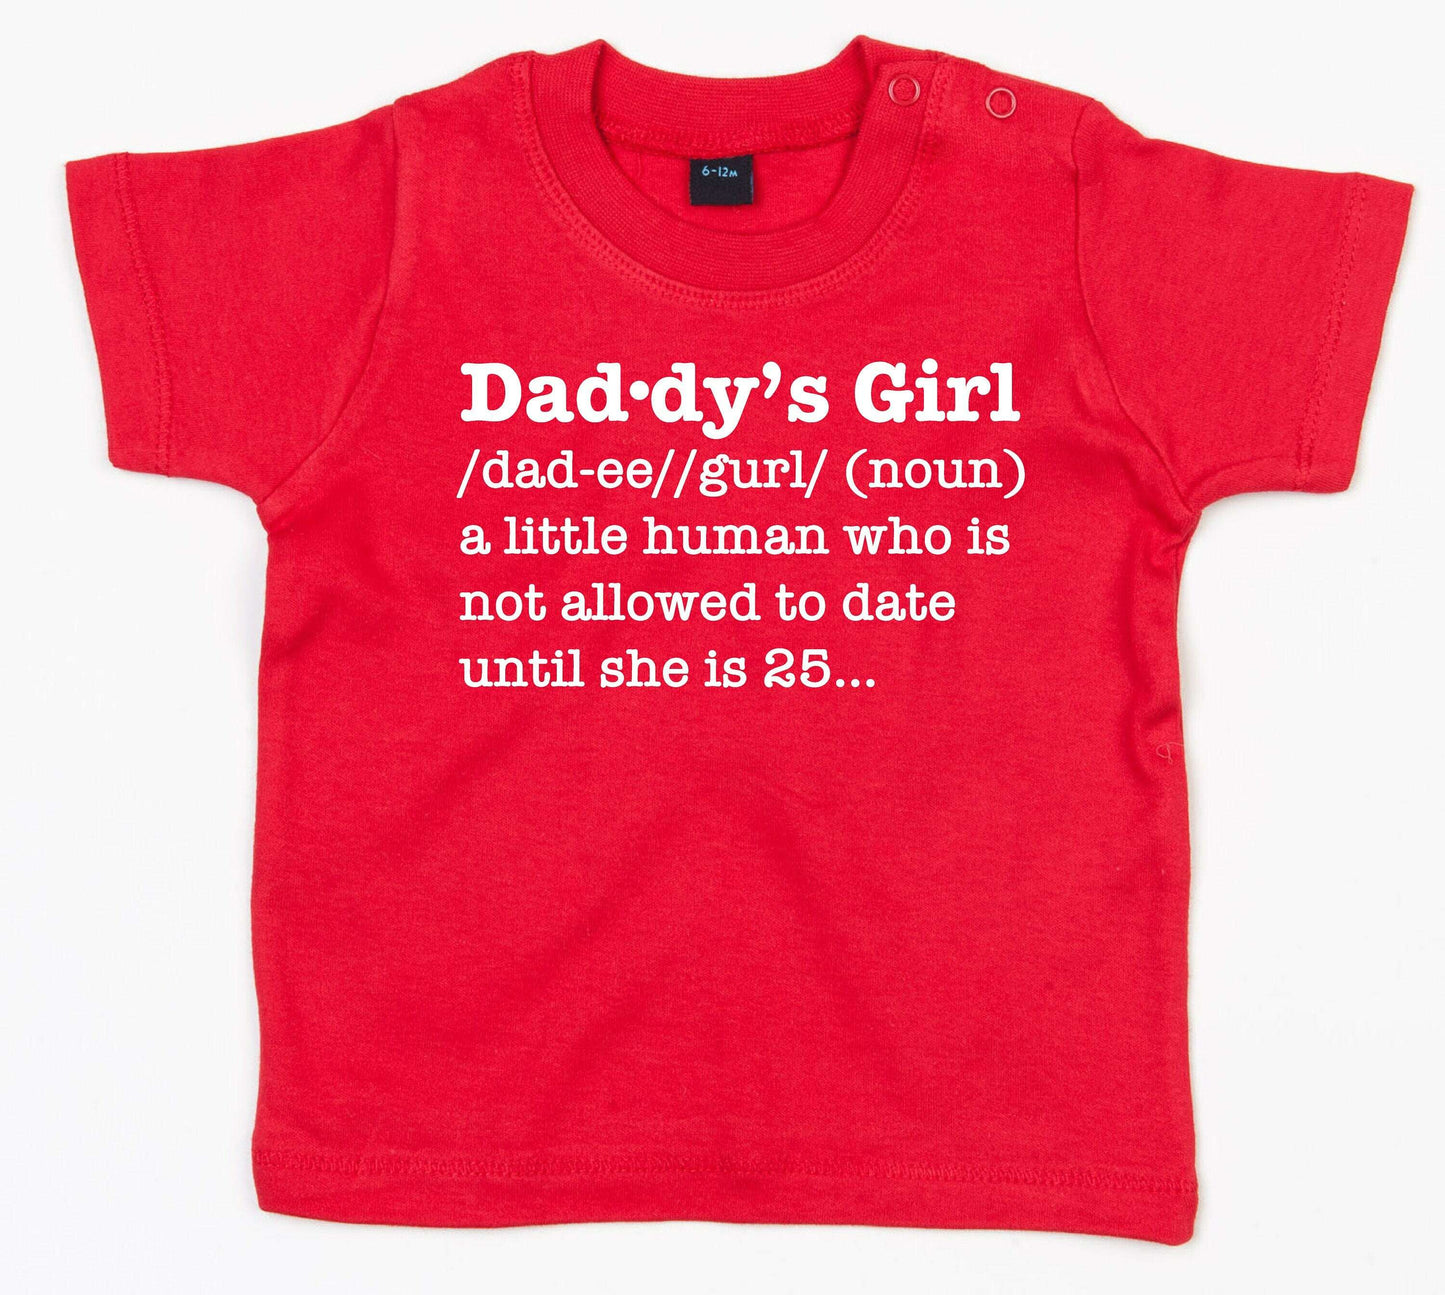 Daddy's Girl Funny Definition T Shirt, Girls Gift, Funny kids tee, cute toddler shirt, one two year old cute kids clothes, sibling t-shirt